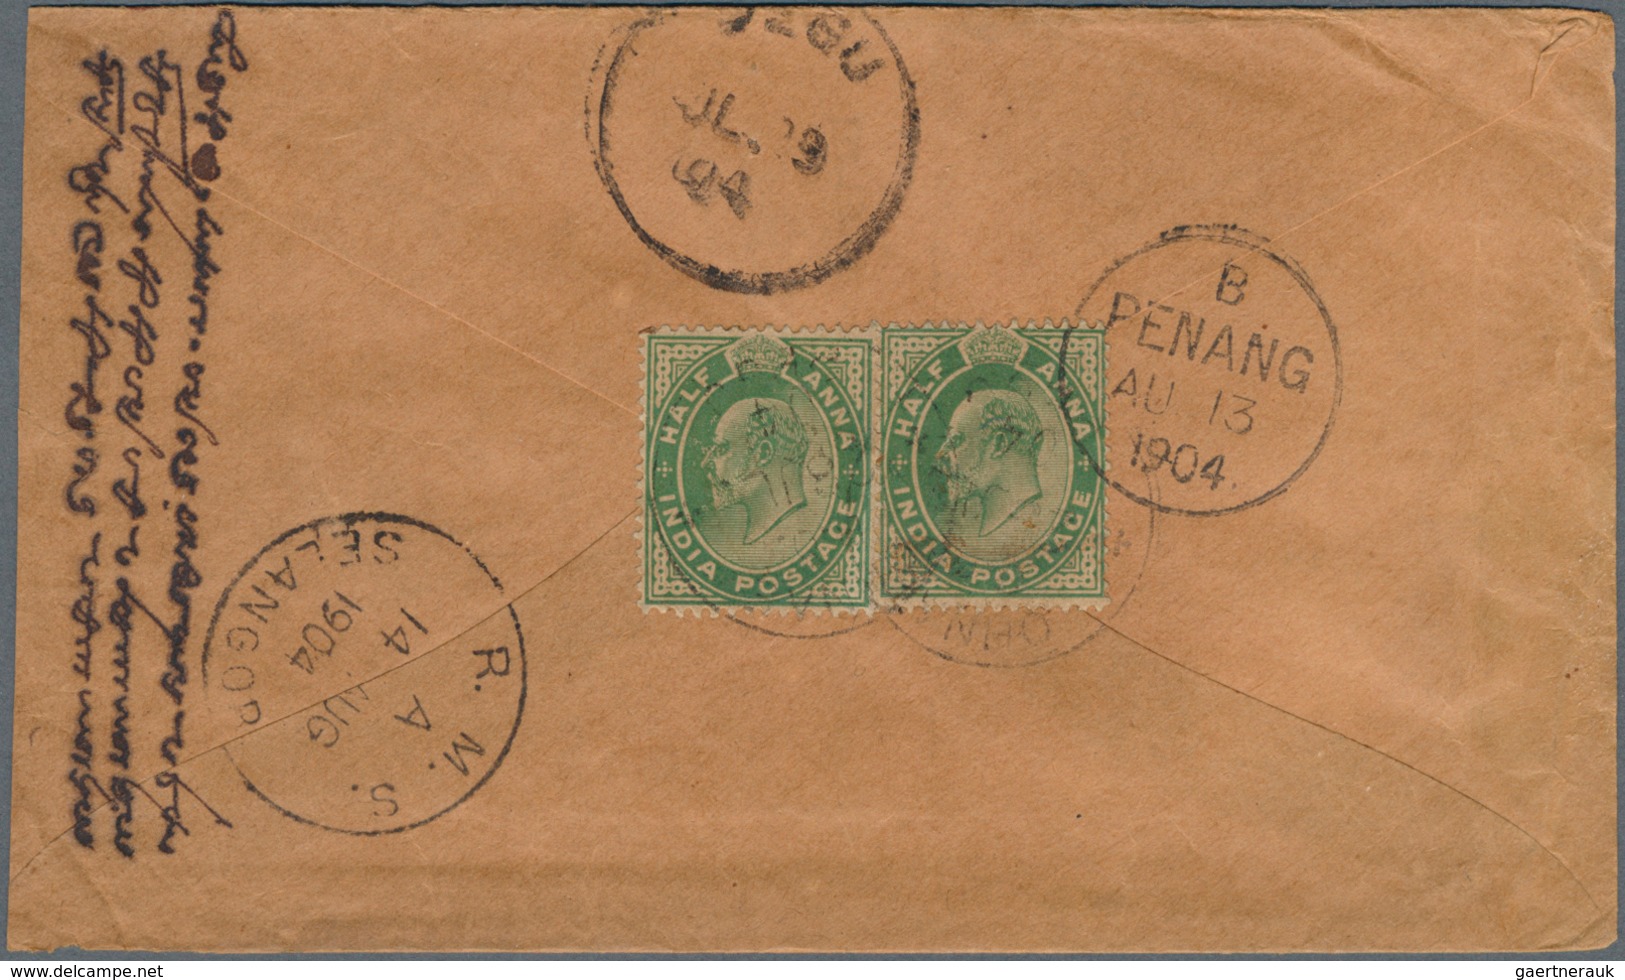 Malaiische Staaten - Selangor: 1925, TRAVELLING POST OFFICE: Two Incoming Covers From India Or Engla - Selangor